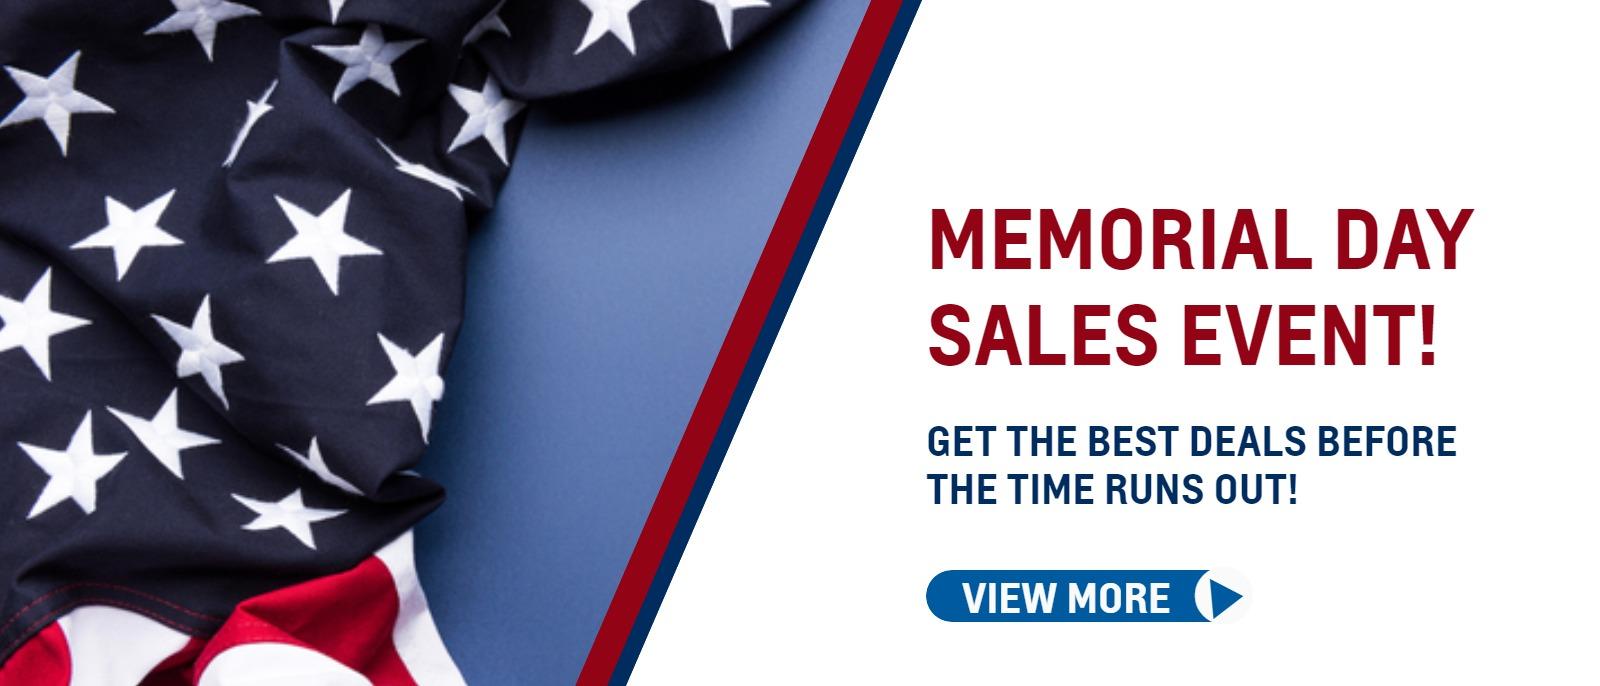 Memorial Day Sales Event! Get the best deals before the time runs out!